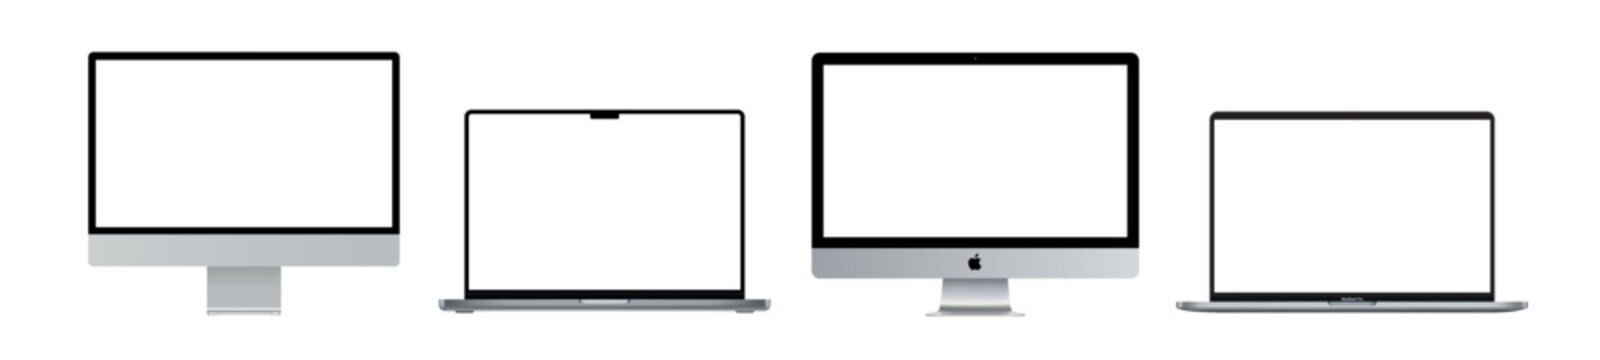 Realistic mockups of Apple devices. Device screen set .Laptop computer monitor. Realistic devices mockup set. Empty screen mock-up. Vector illustration